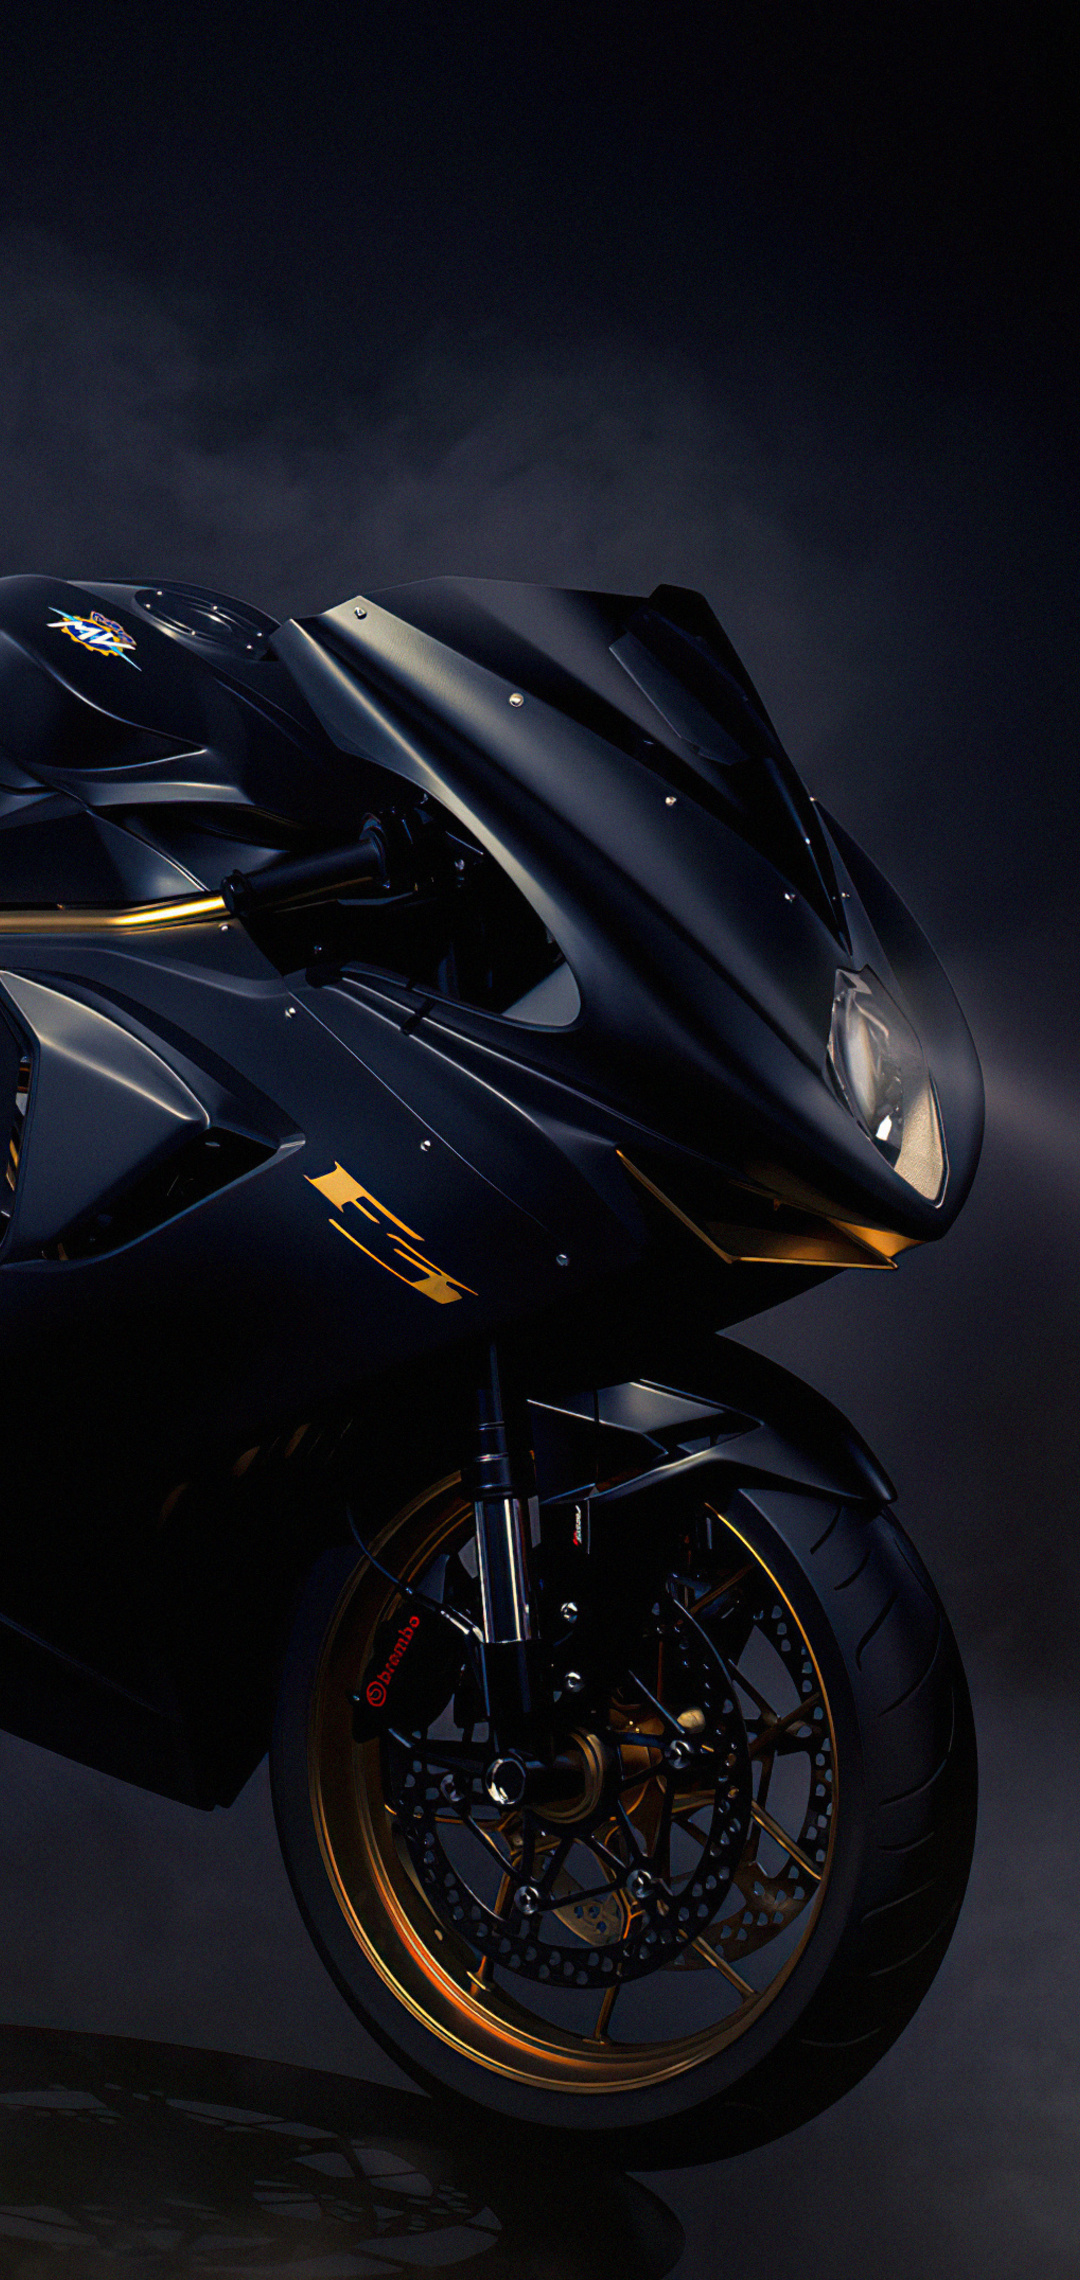 1080x2280 MV Agusta F3 800 4k One Plus 6,Huawei p20,Honor view 10,Vivo y85, Oppo f7,Xiaomi Mi A2 HD 4k Wallpapers, Images, Backgrounds, Photos and  Pictures